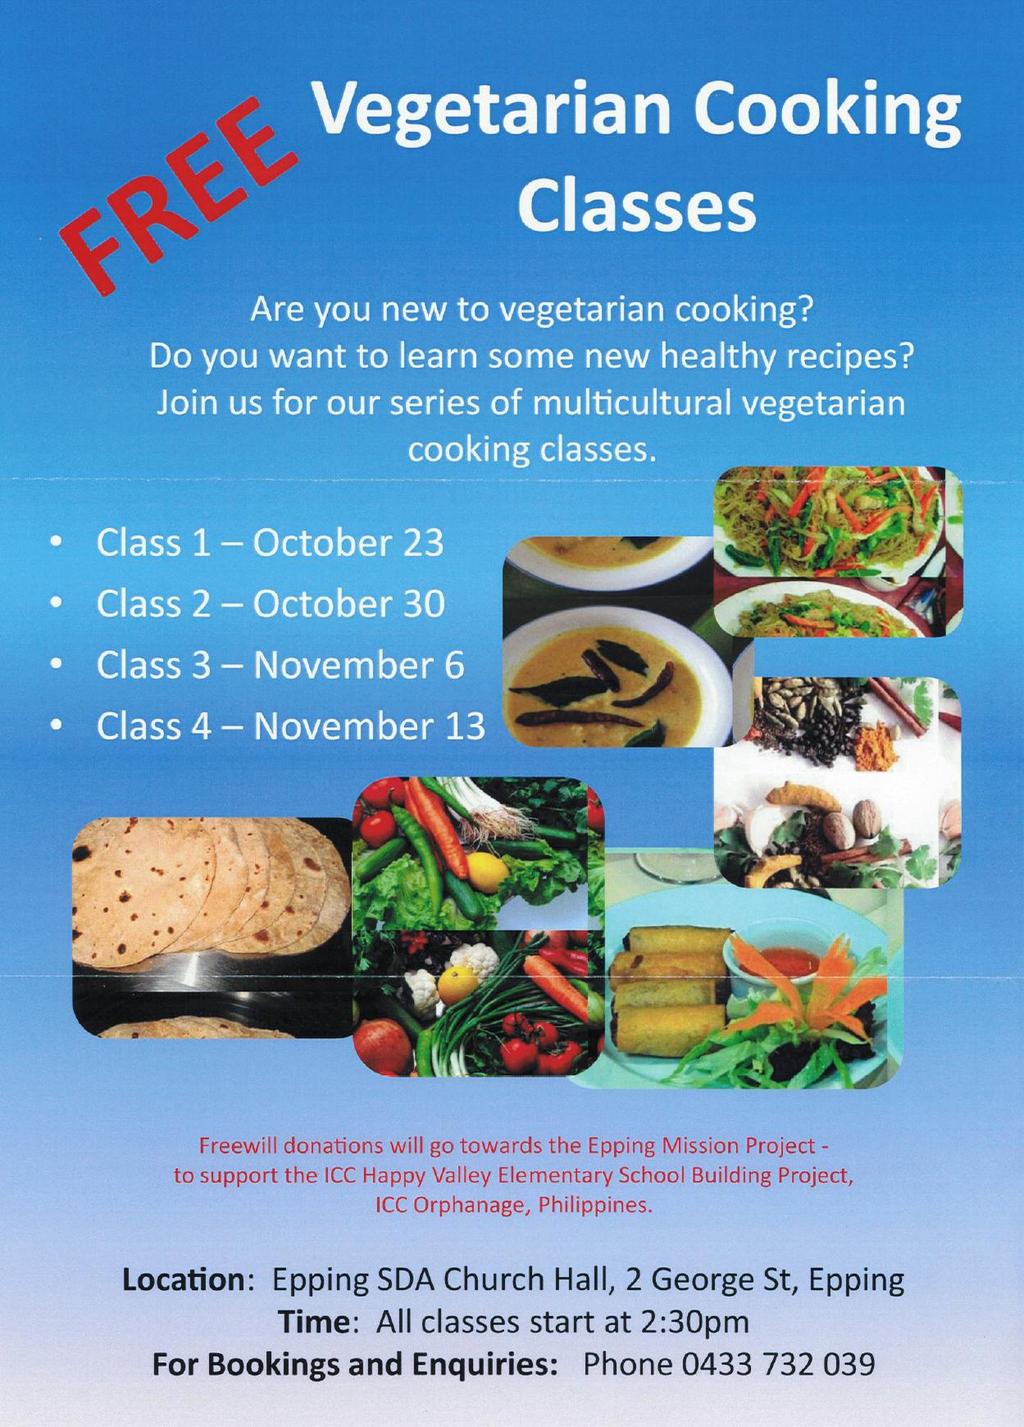 Vegetarian Cooking Classes: Oct 23-Nov 13 (This Sabbath) Vegetarian Cooking classes will start THIS Sabbath Oct 23 from 2:30pm Church Hall Please remember to pray for our upcoming Vegetarian cooking